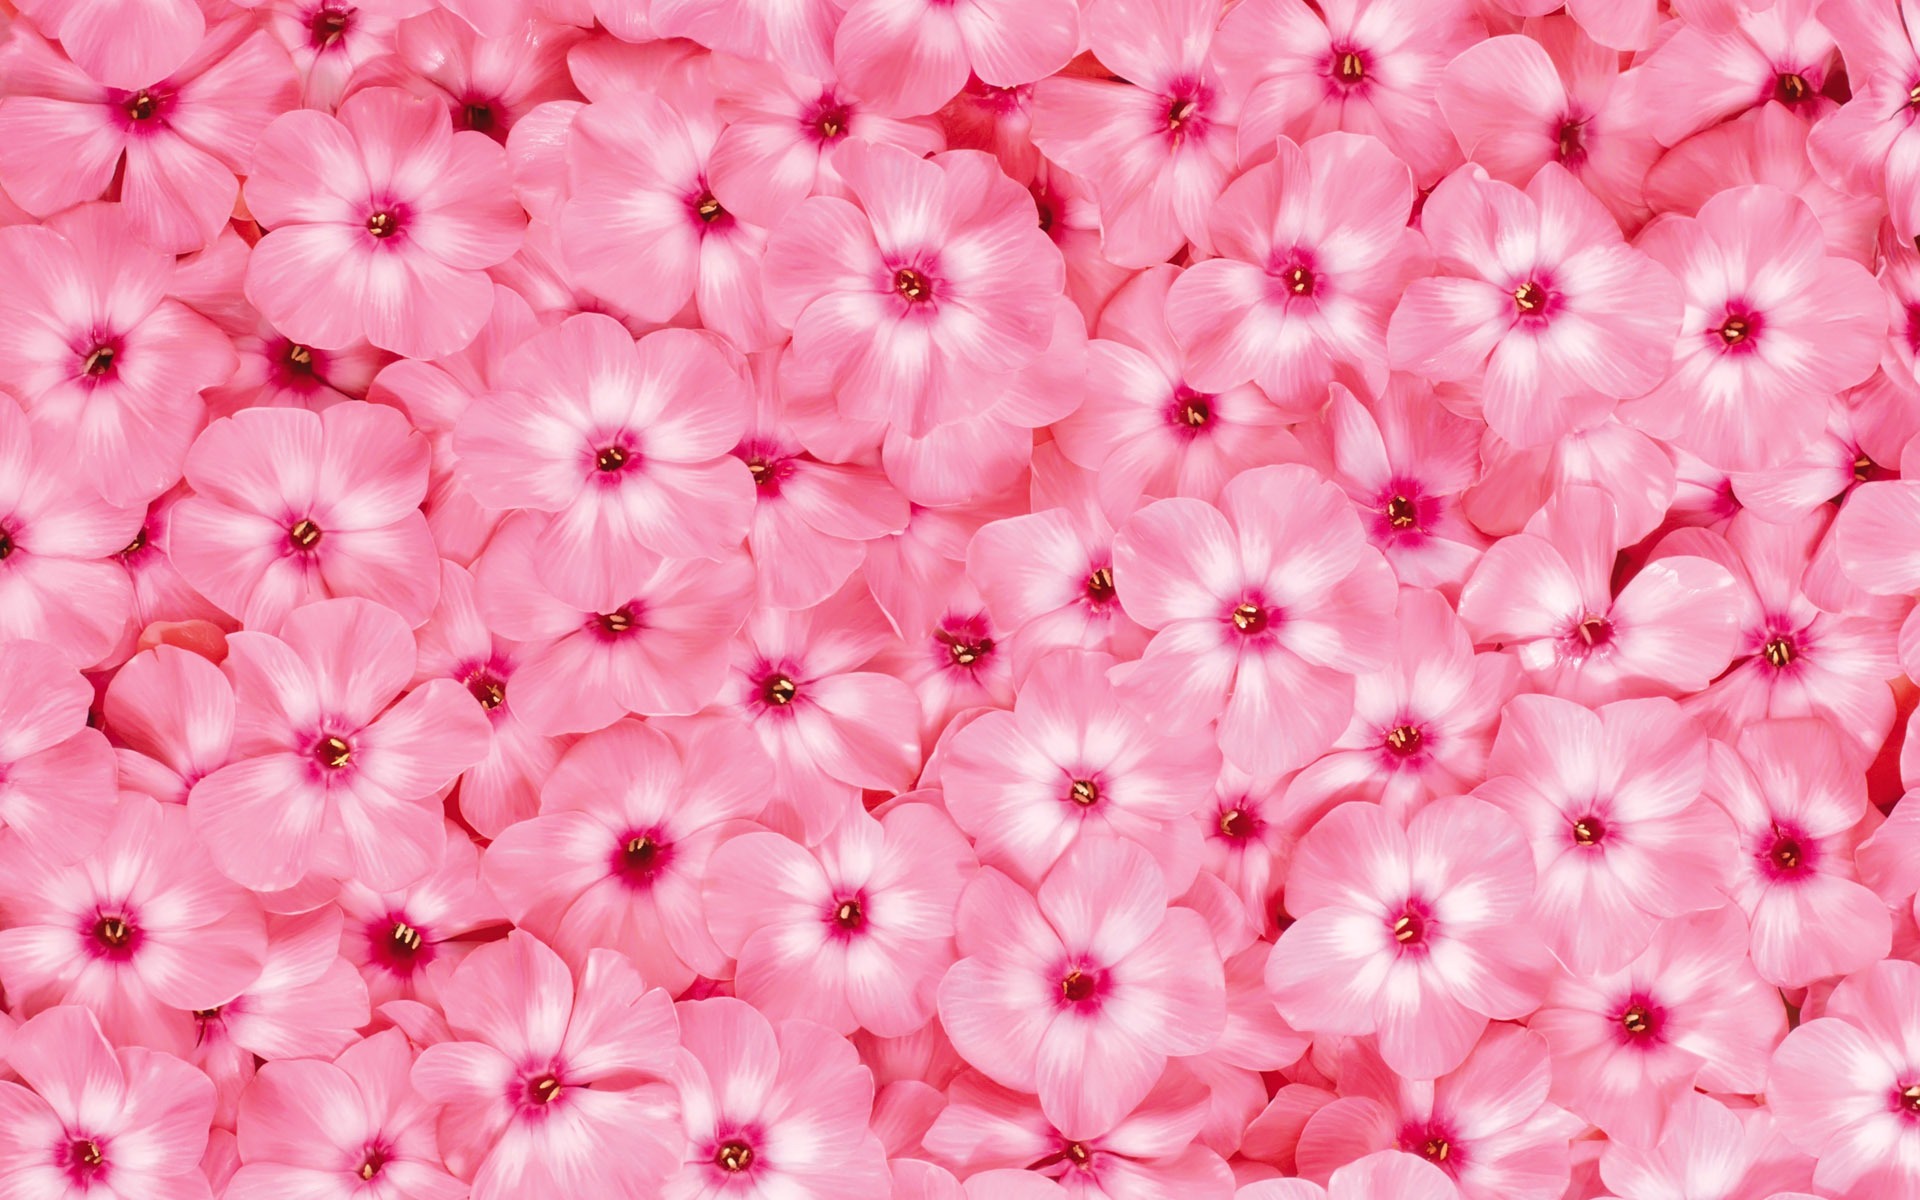 Surrounded by stunning flowers wallpaper #14 - 1920x1200